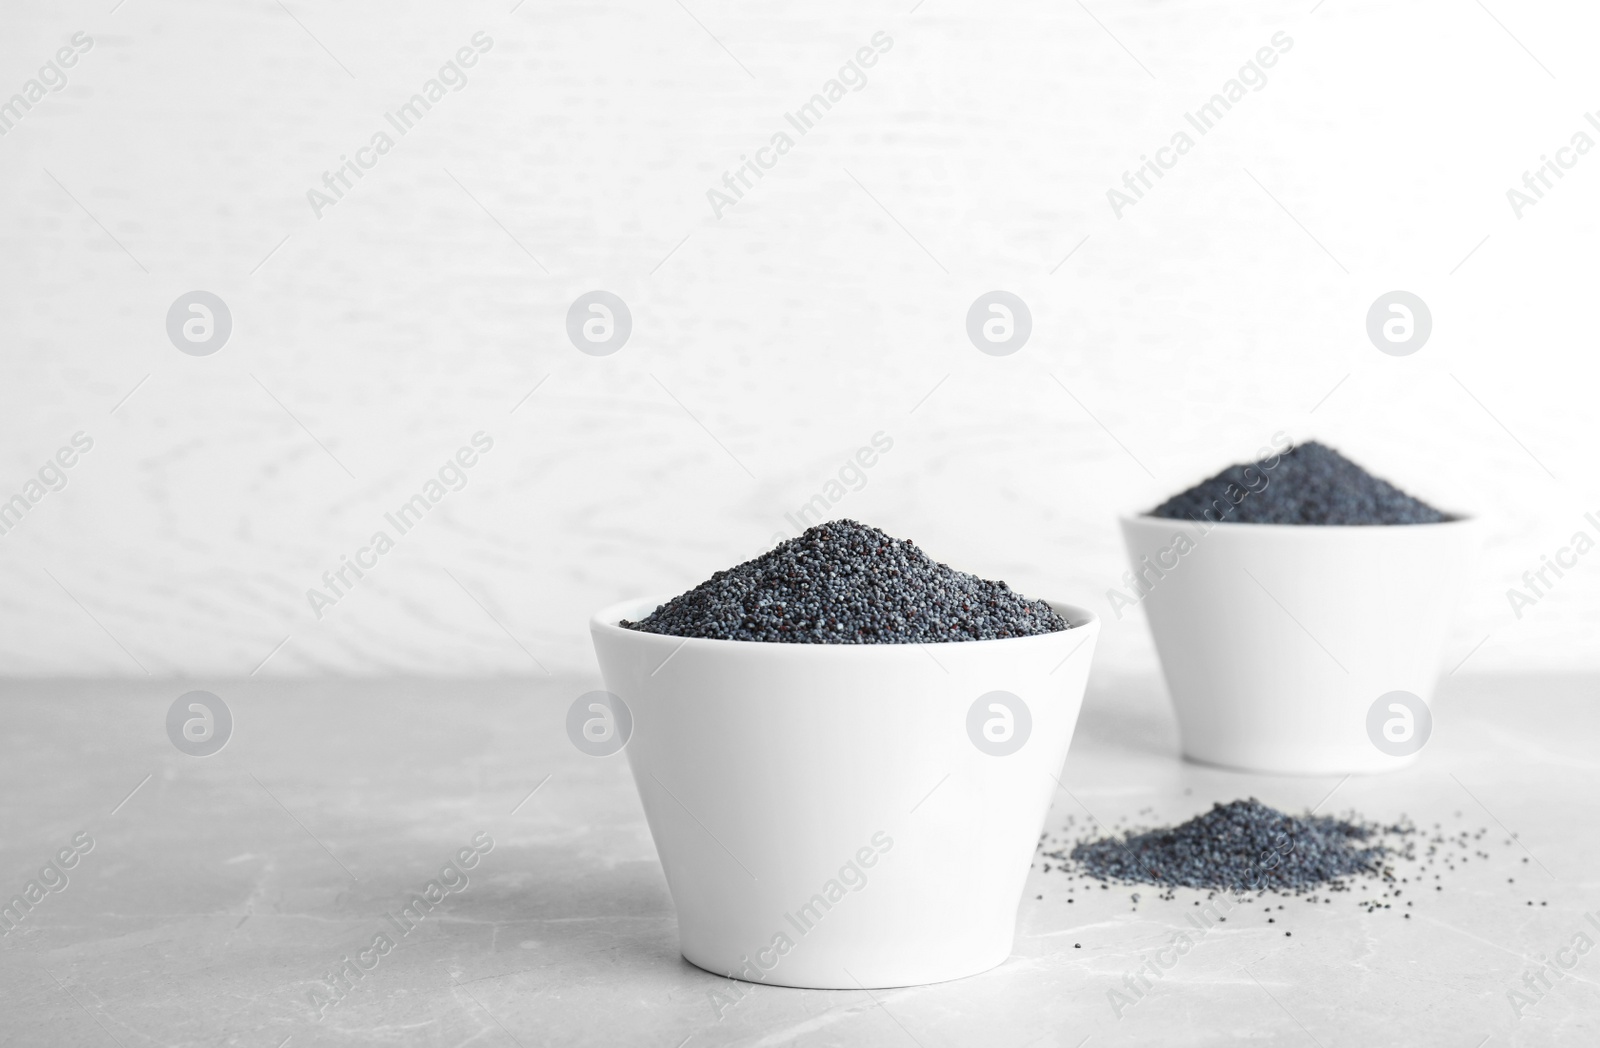 Photo of Poppy seeds in bowl on table against light background. Space for text